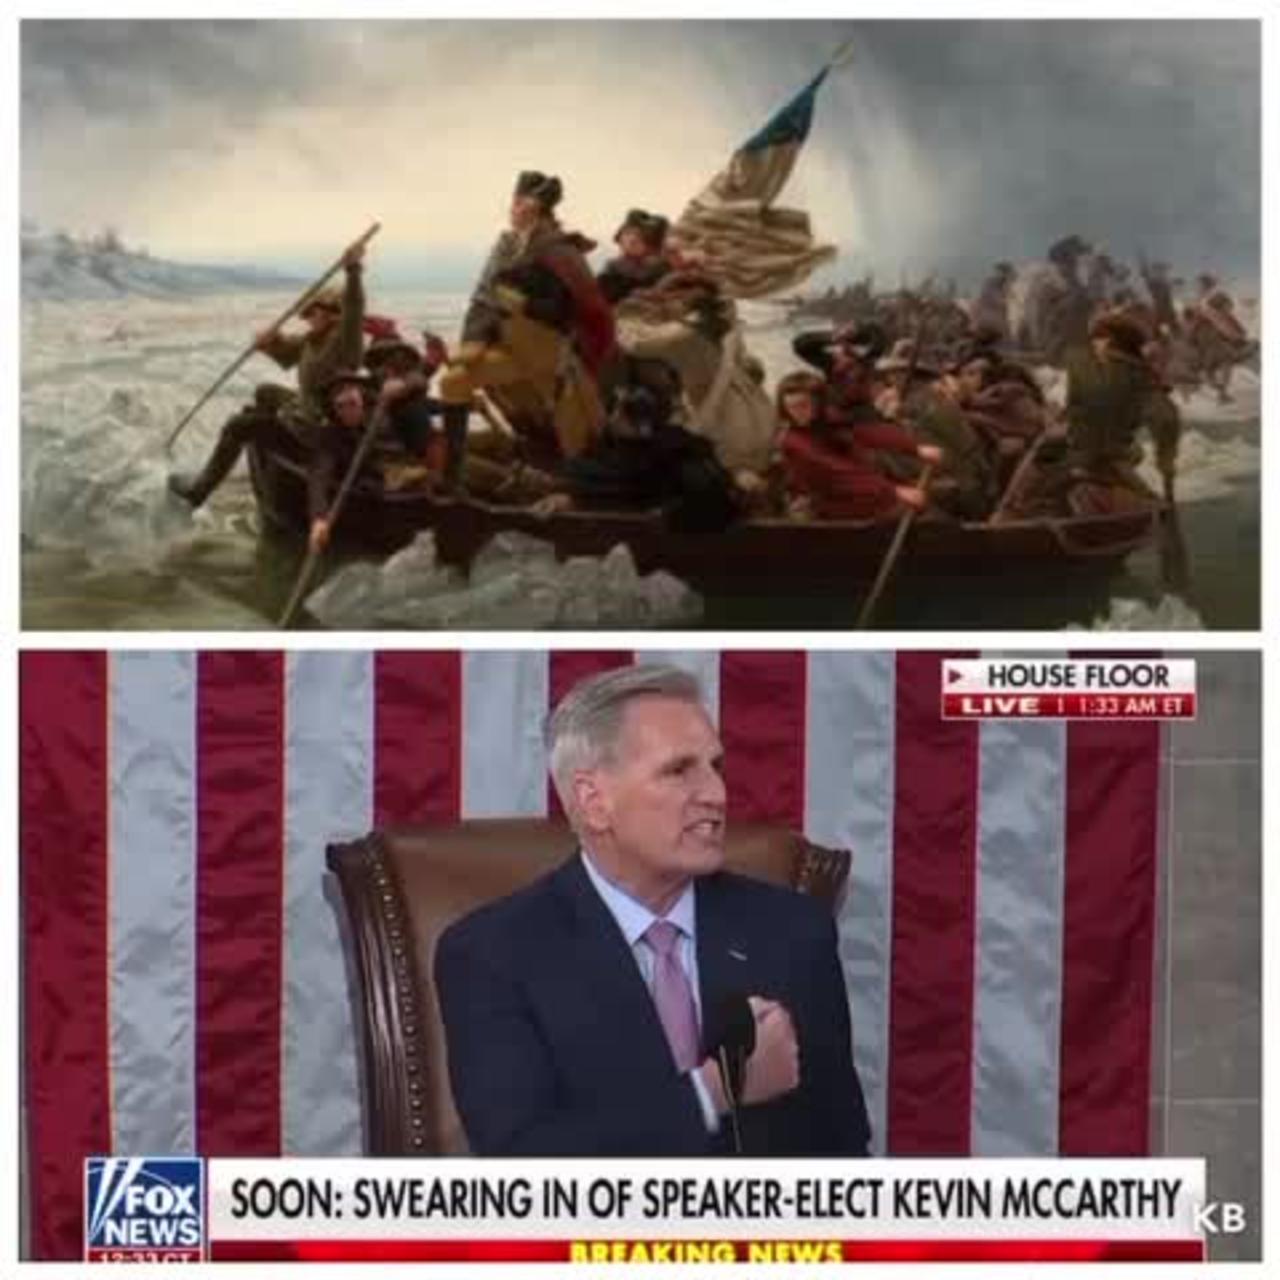 Kevin McCarthy: Speech After Winning Speaker of the House & says “Durham Boat”